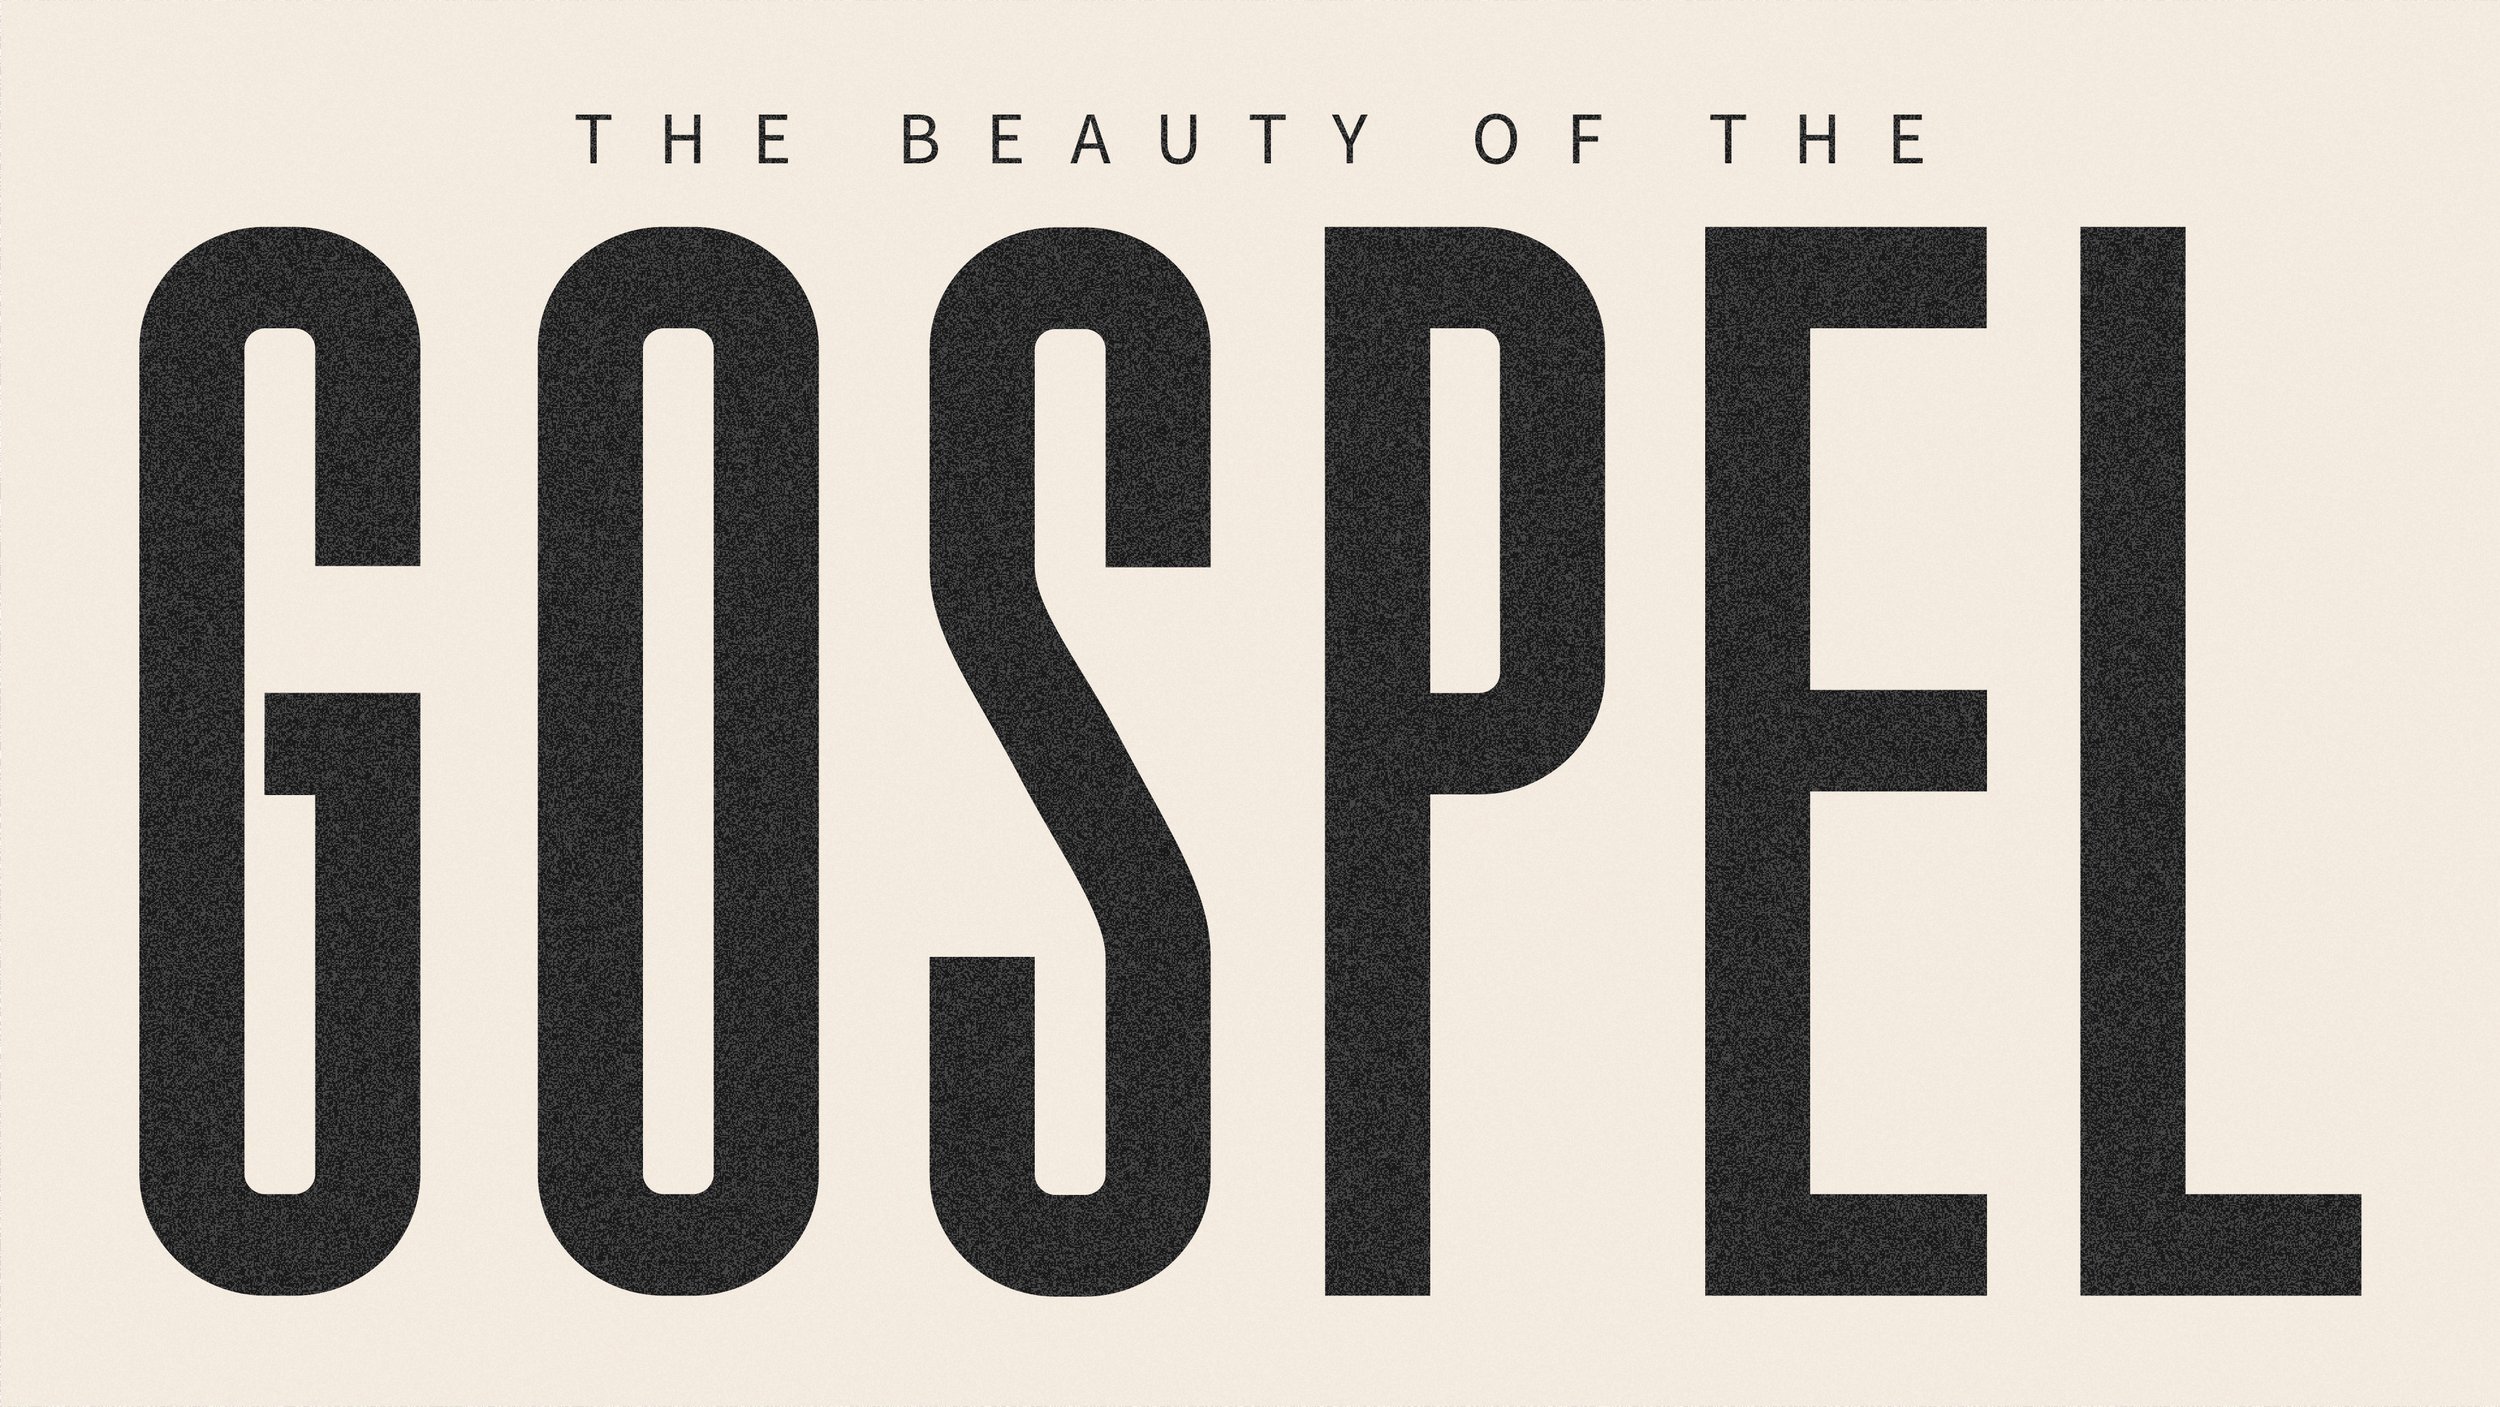 The Beauty of the Gospel